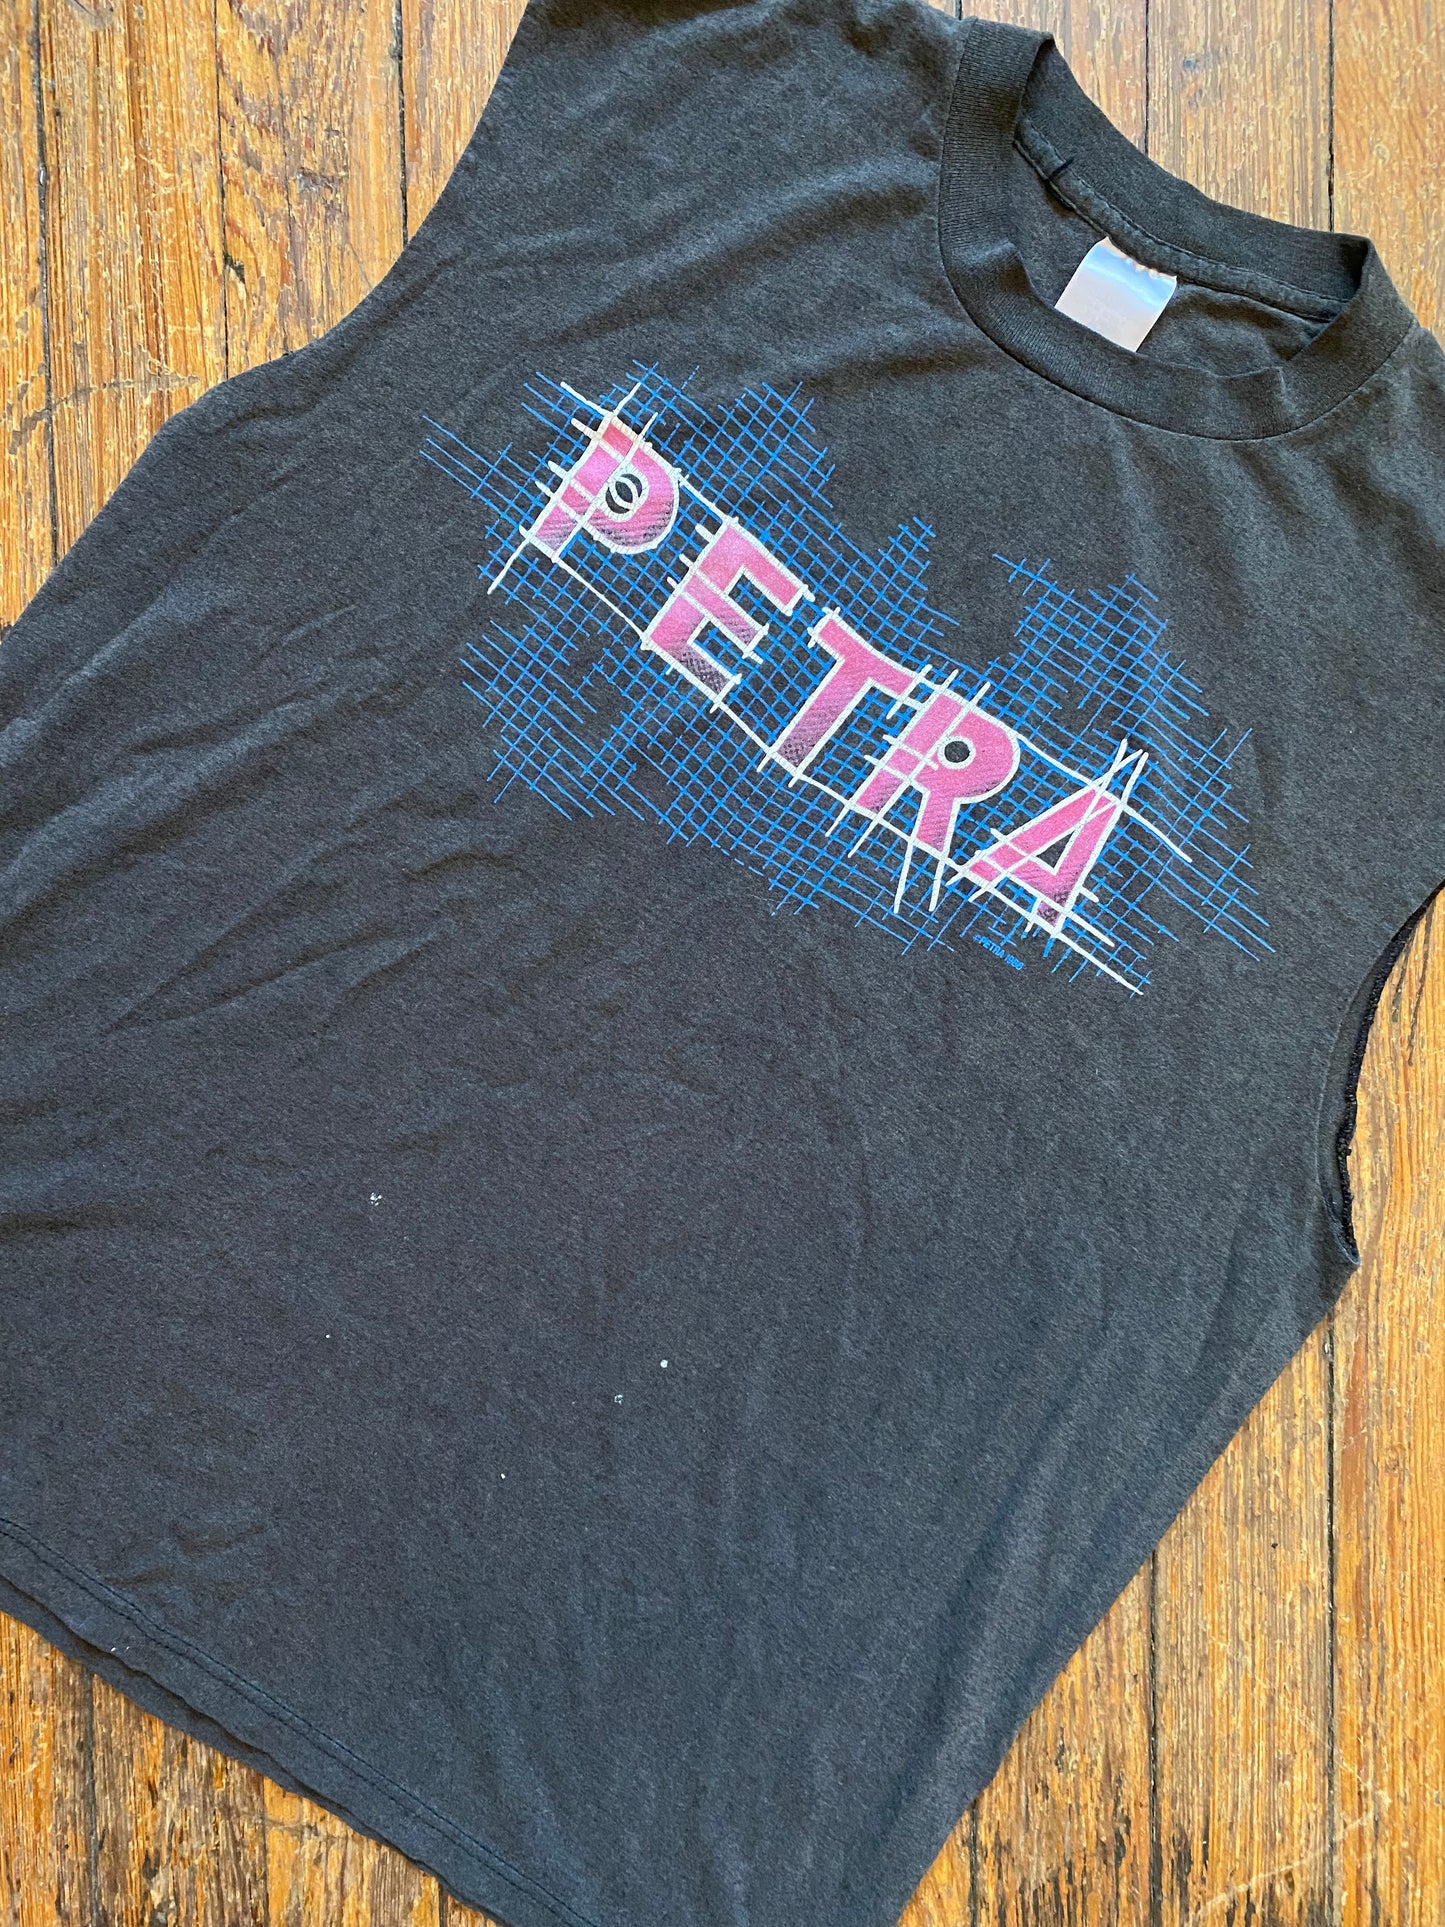 Vintage 1986 Petra “Back to the Street” Shirt